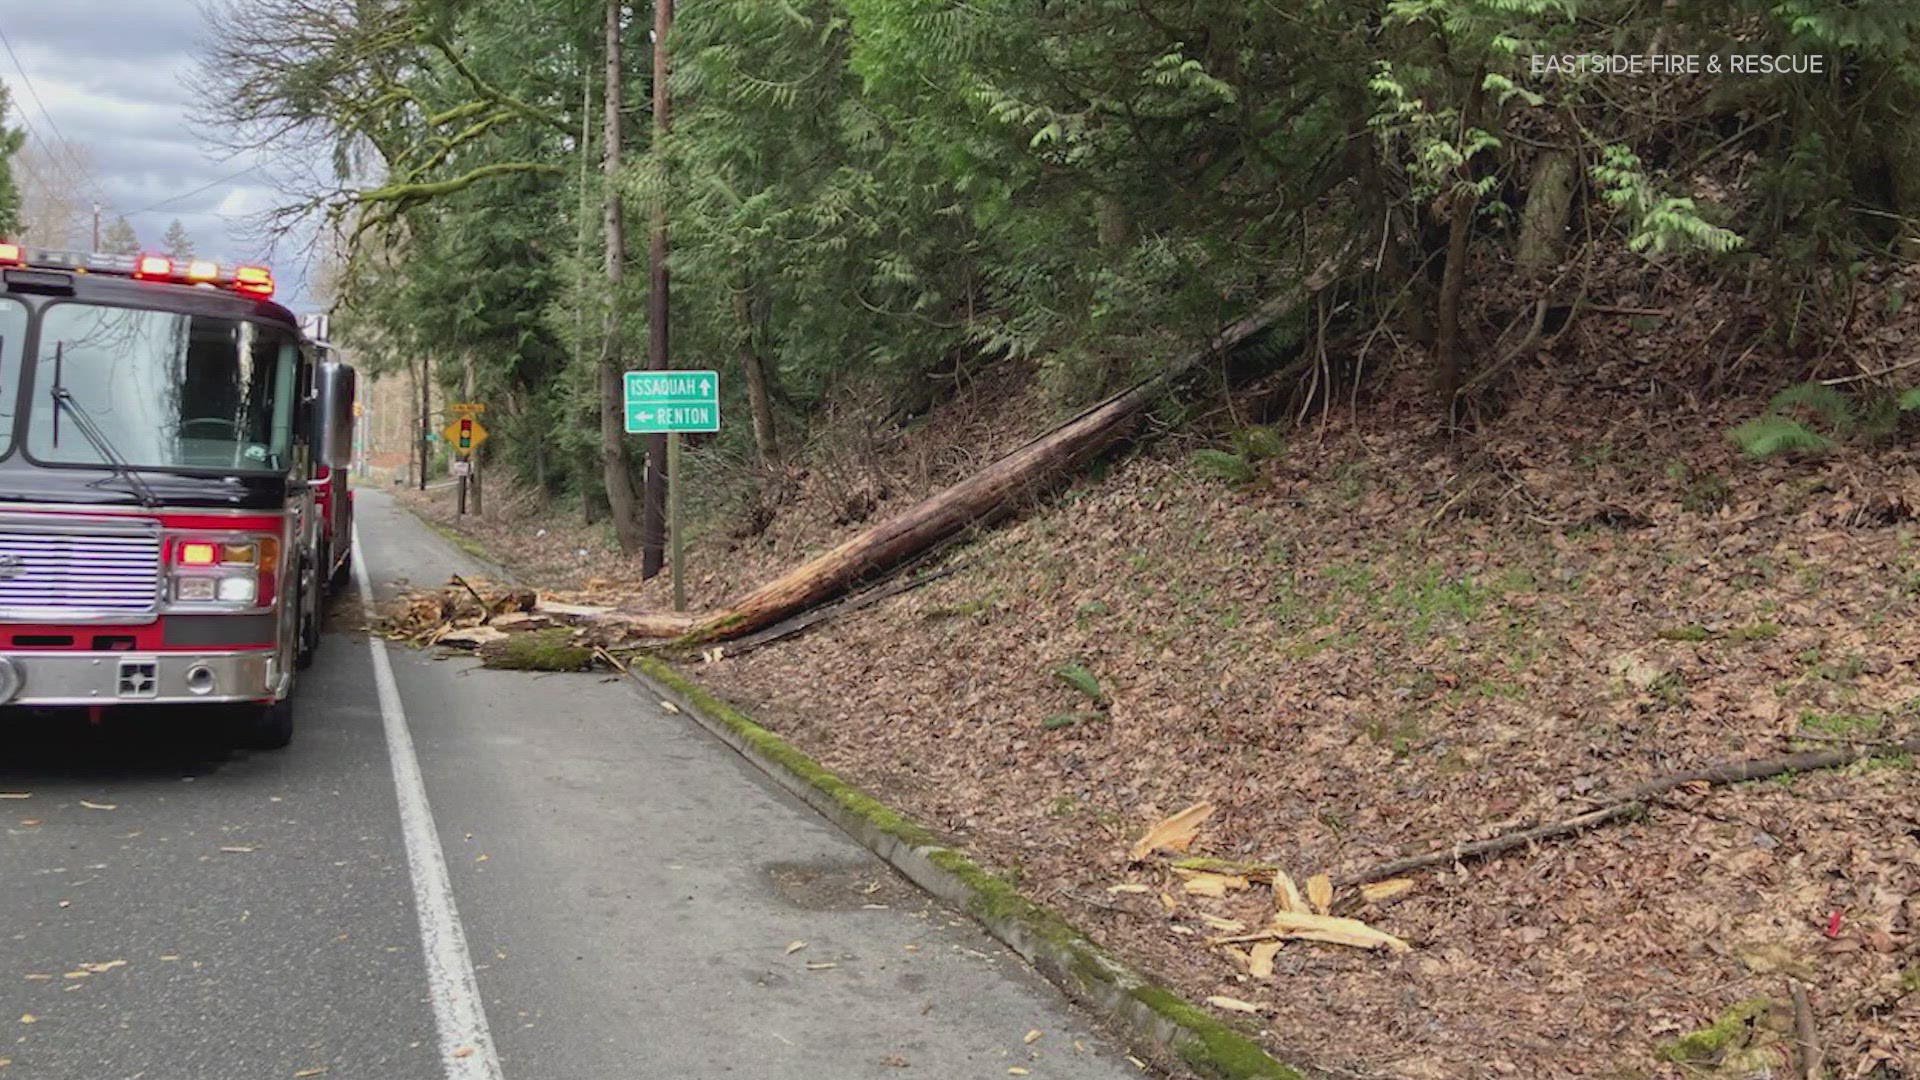 The King County Sheriff's Office said wind caused the large tree to fall on Saturday morning.